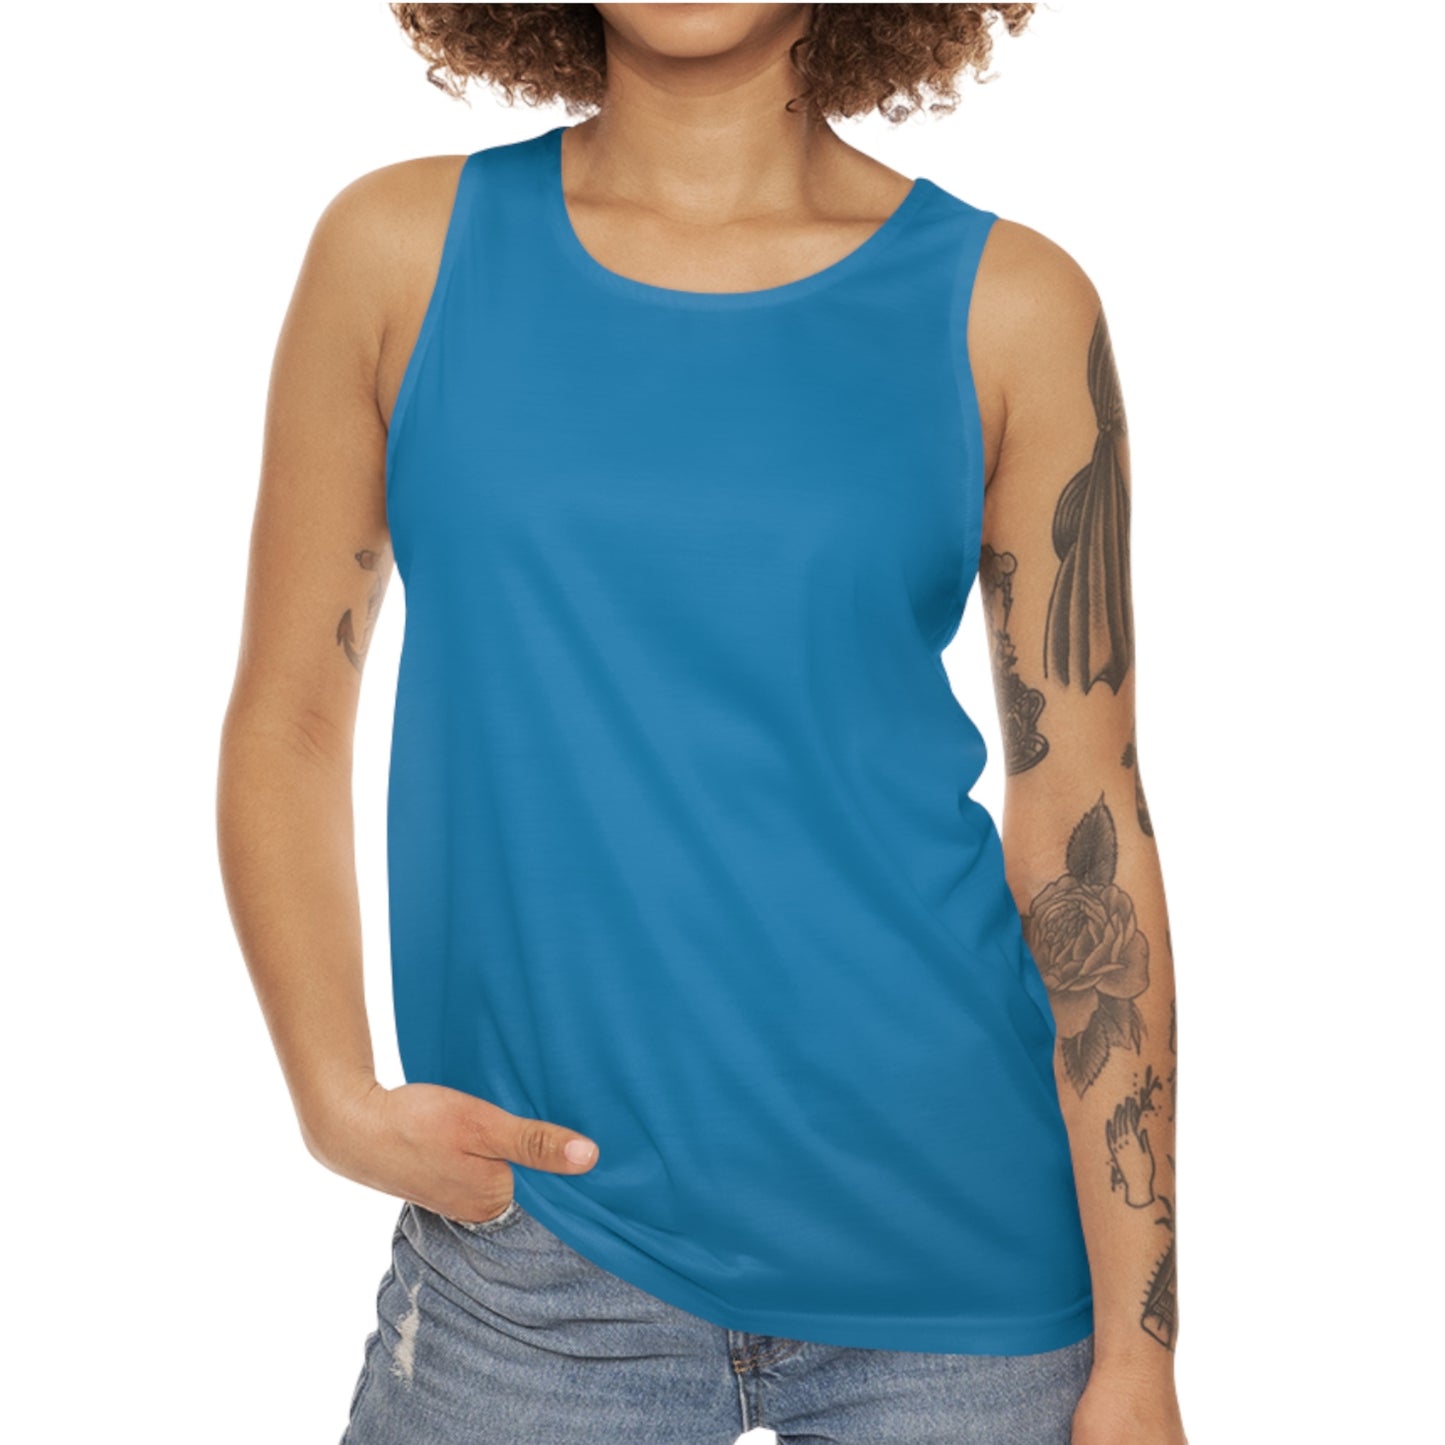 Solid Turquoise Unisex Tank Top